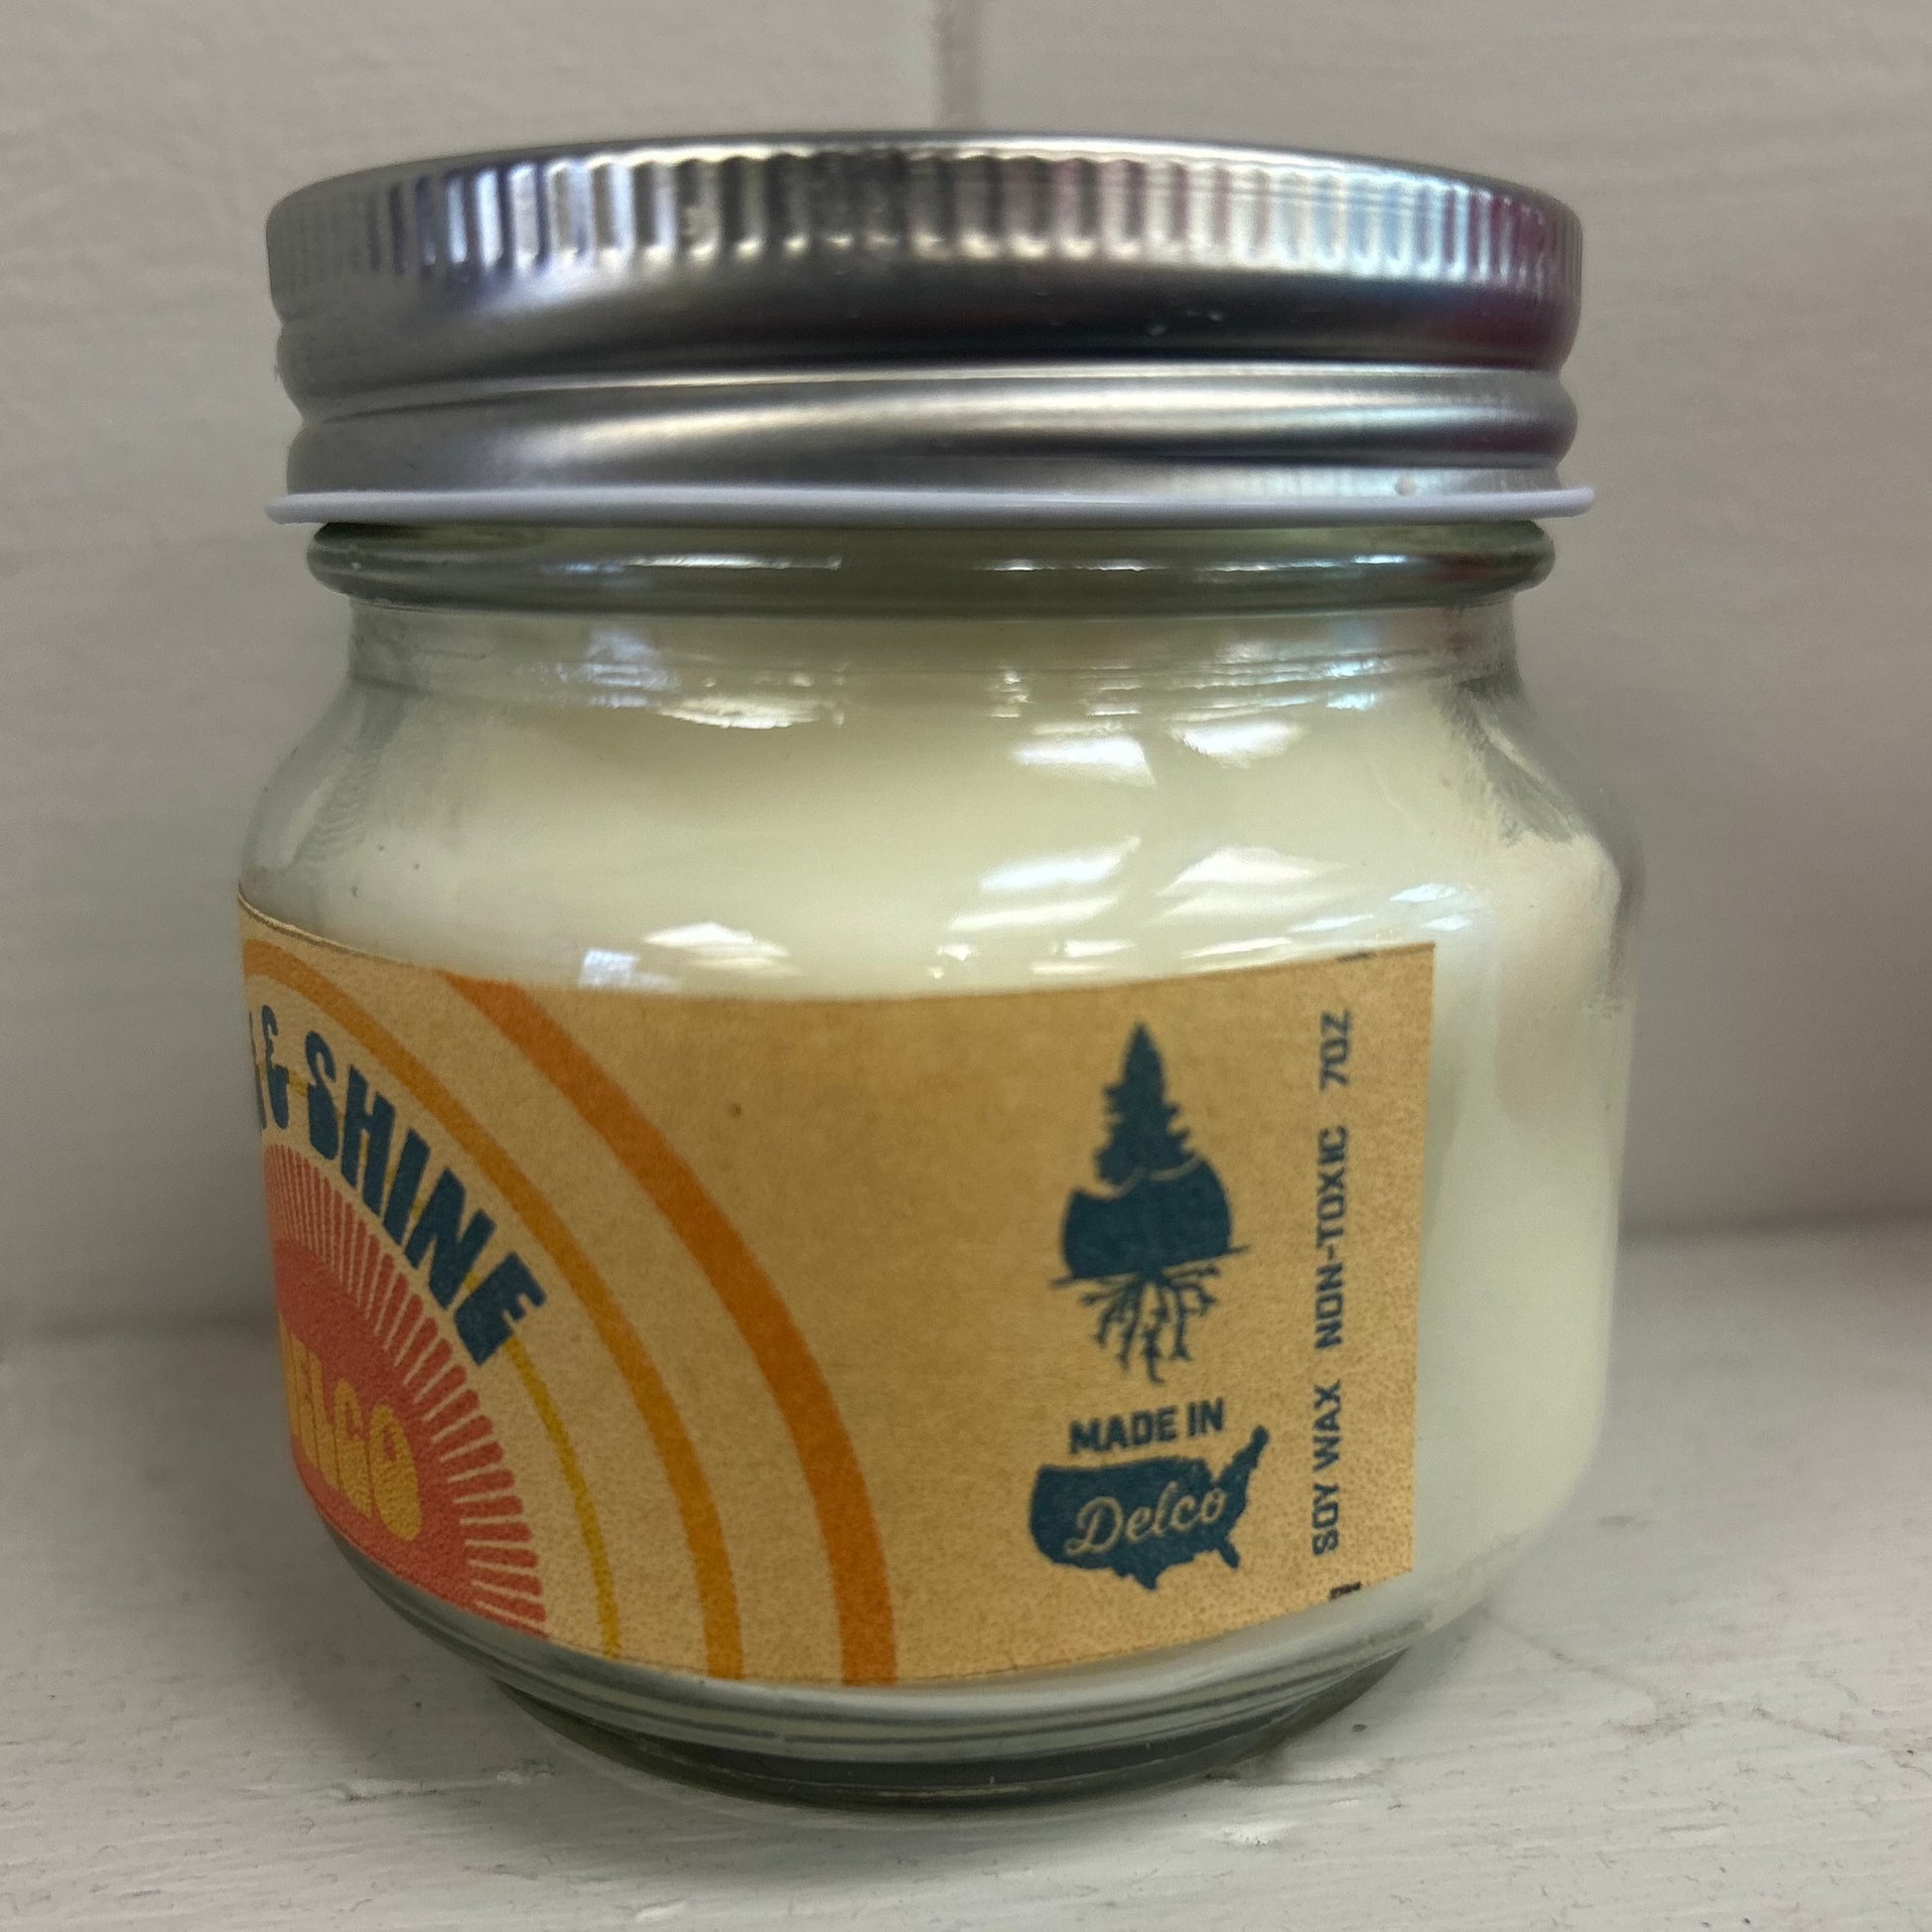 BlueRooted Rise & Shine DELCO Candle